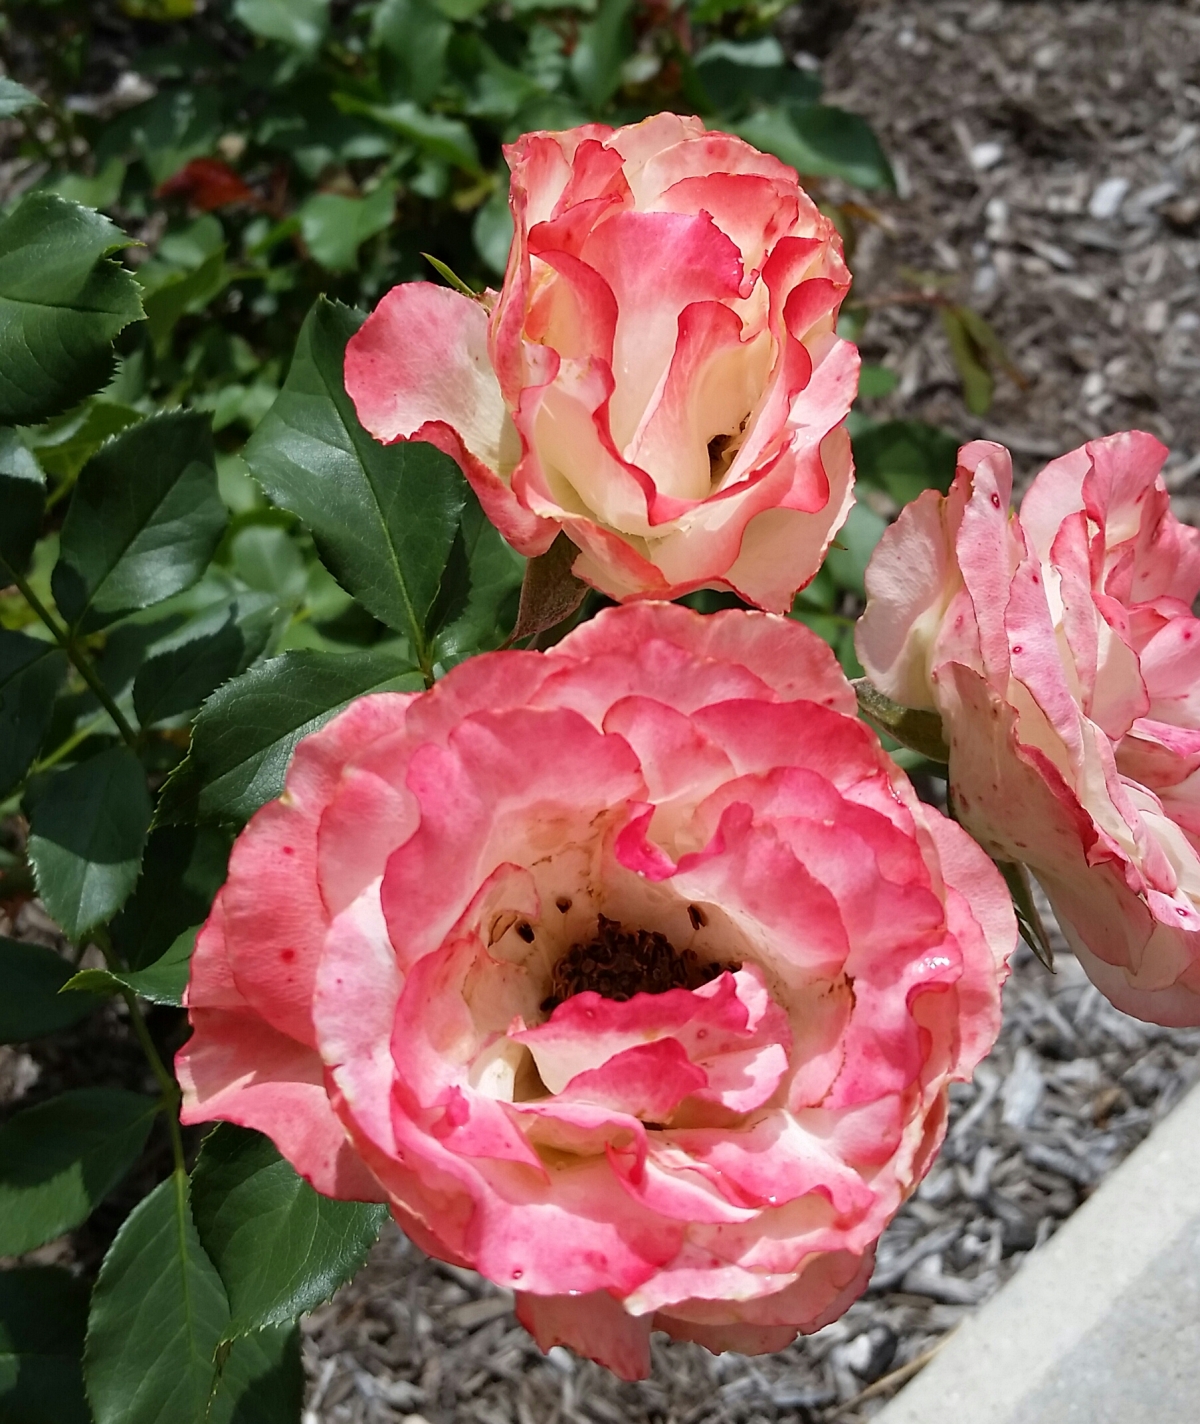 Roses with pink edges, white inside